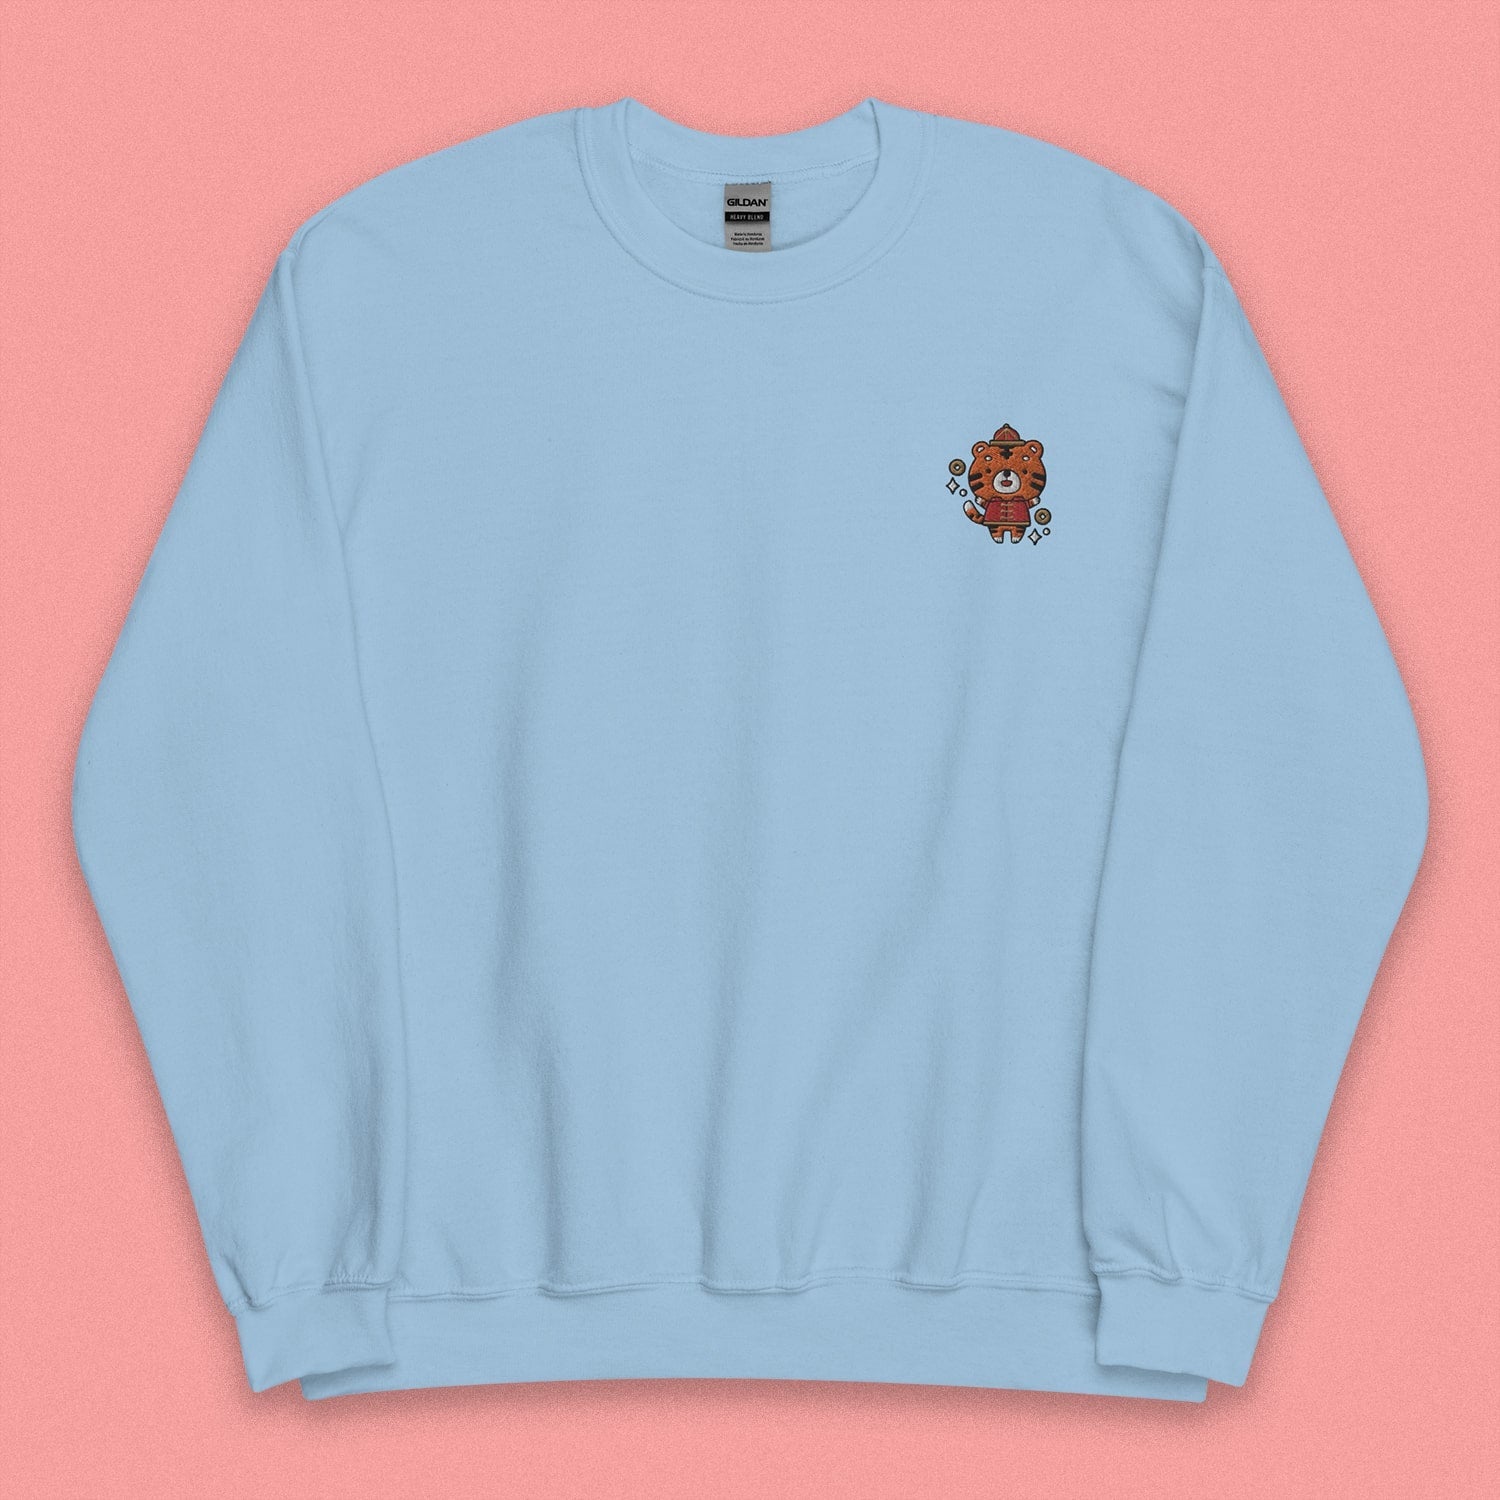 Year of the Tiger Embroidered Sweatshirt - Ni De Mama Chinese Clothing